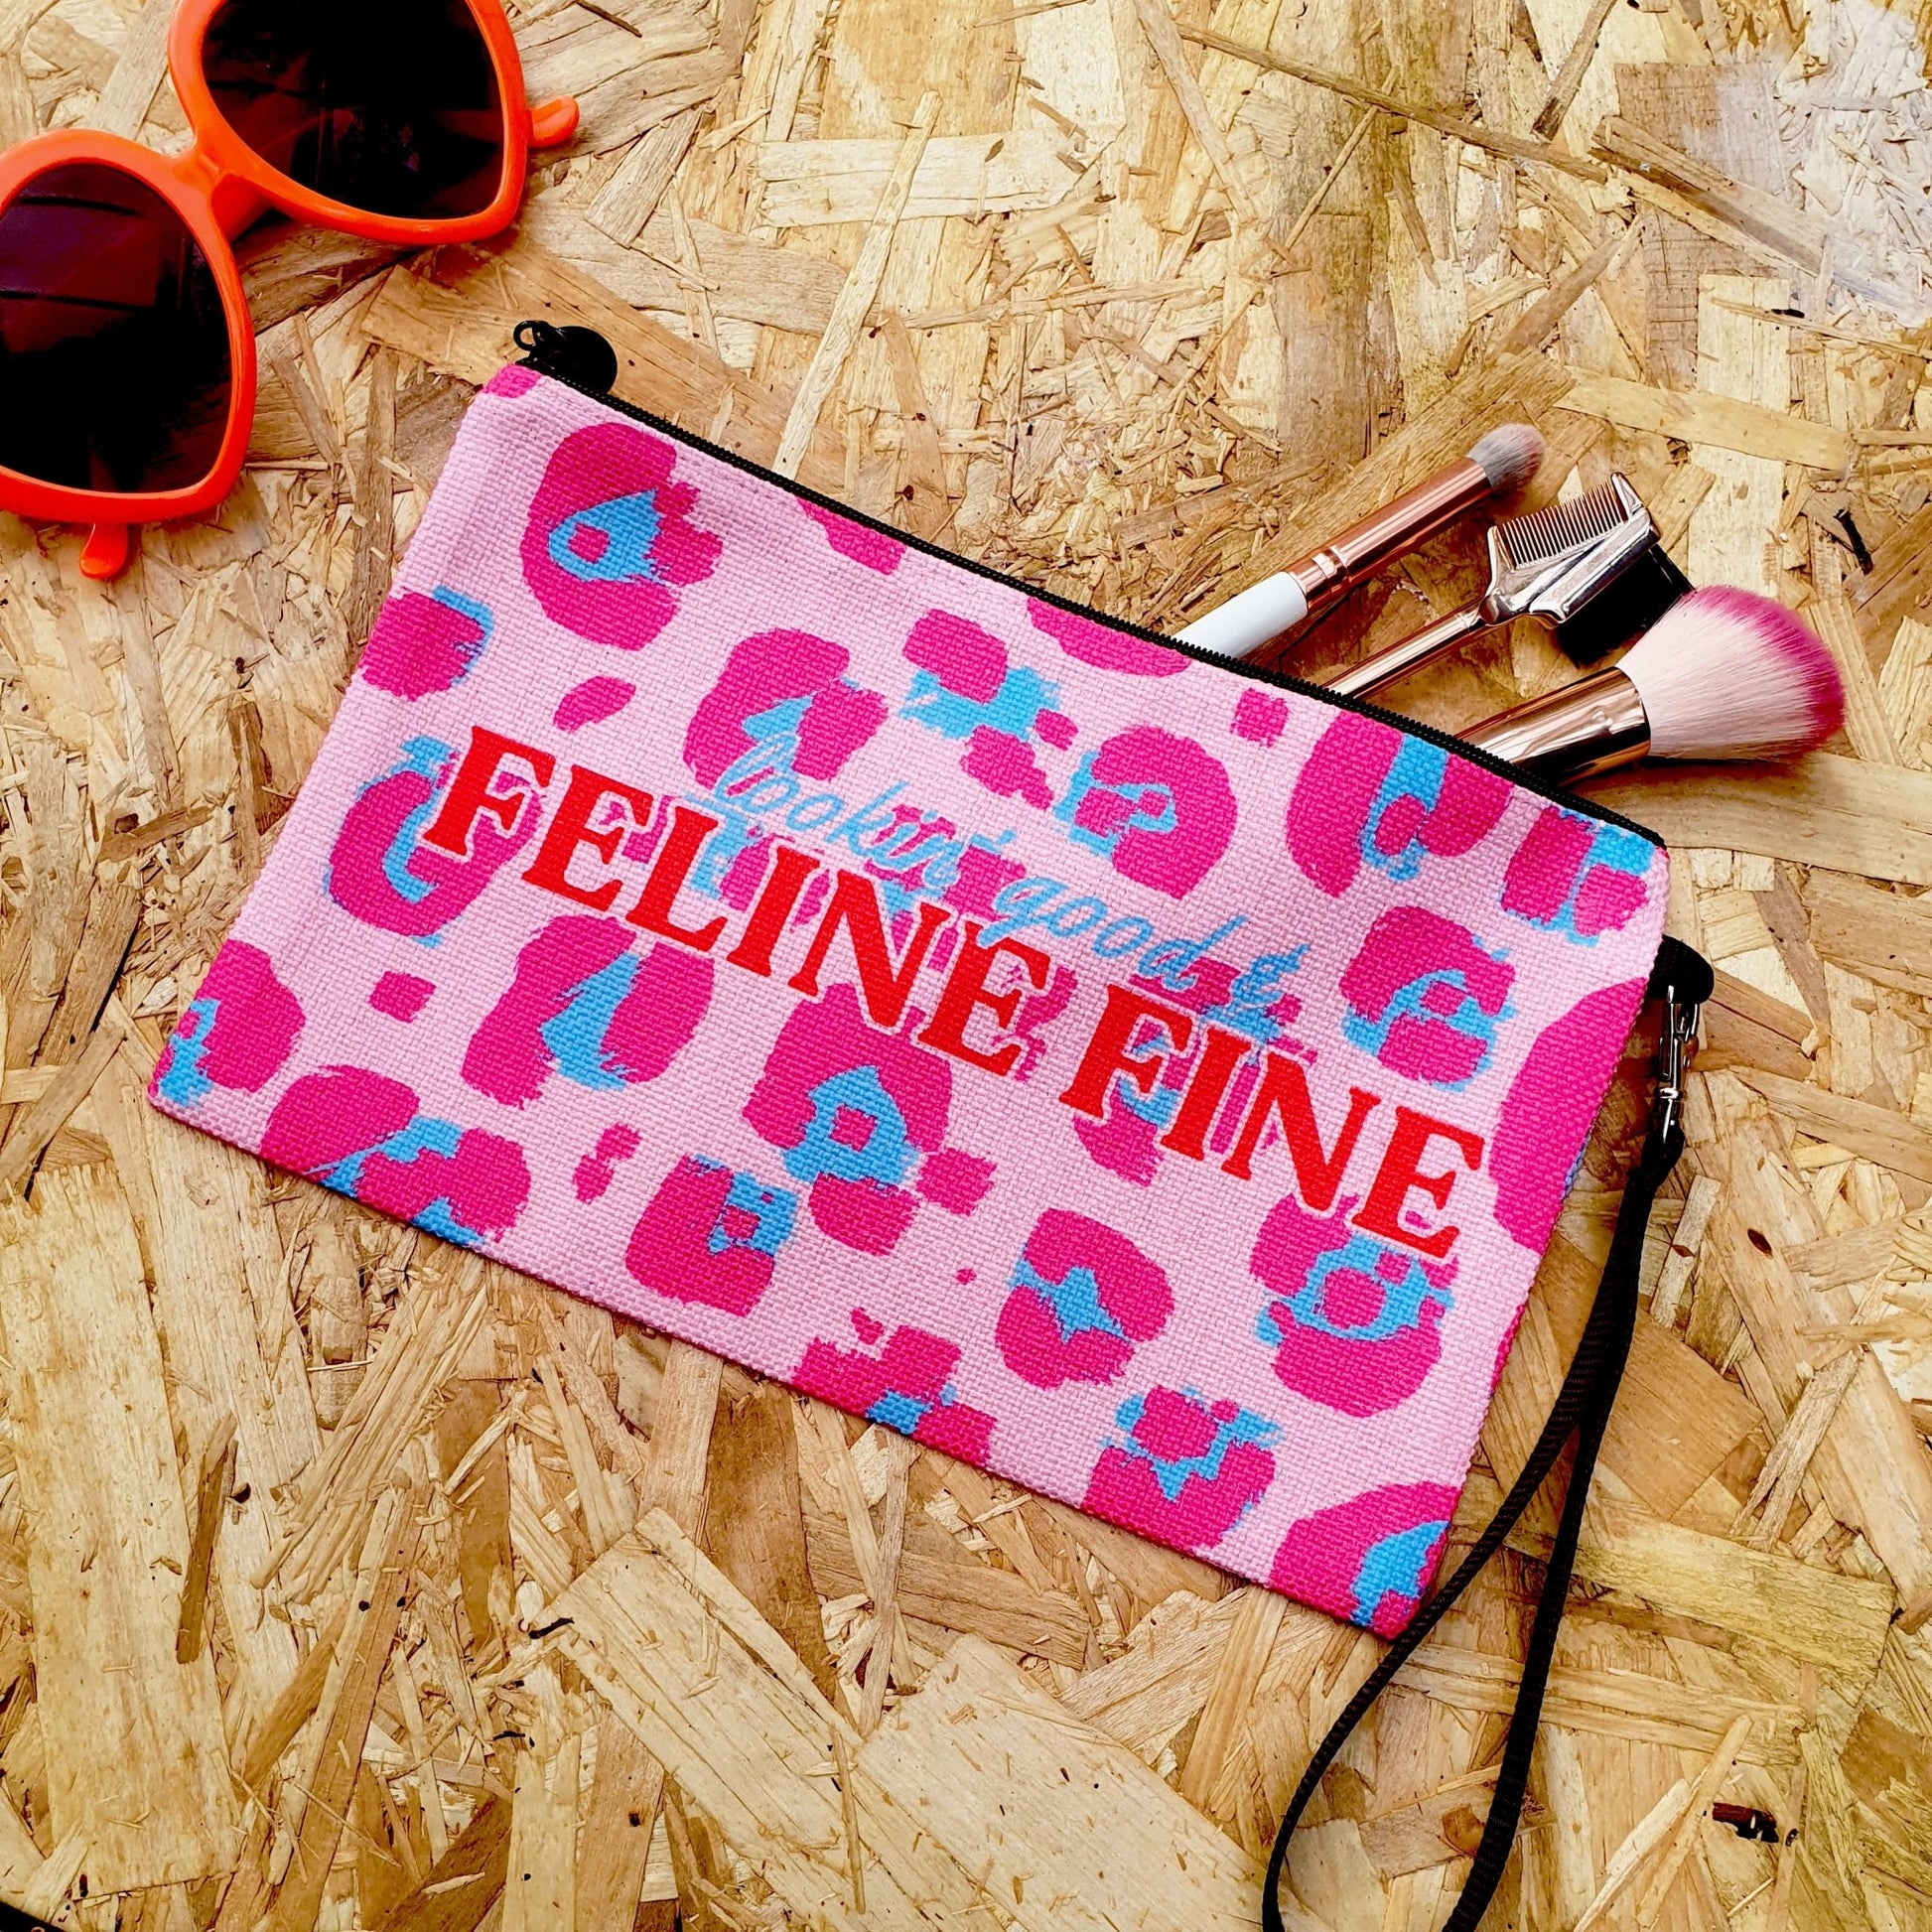 'Looking Good & Feline Fine' Make Up Pouch - Fawn and Thistle